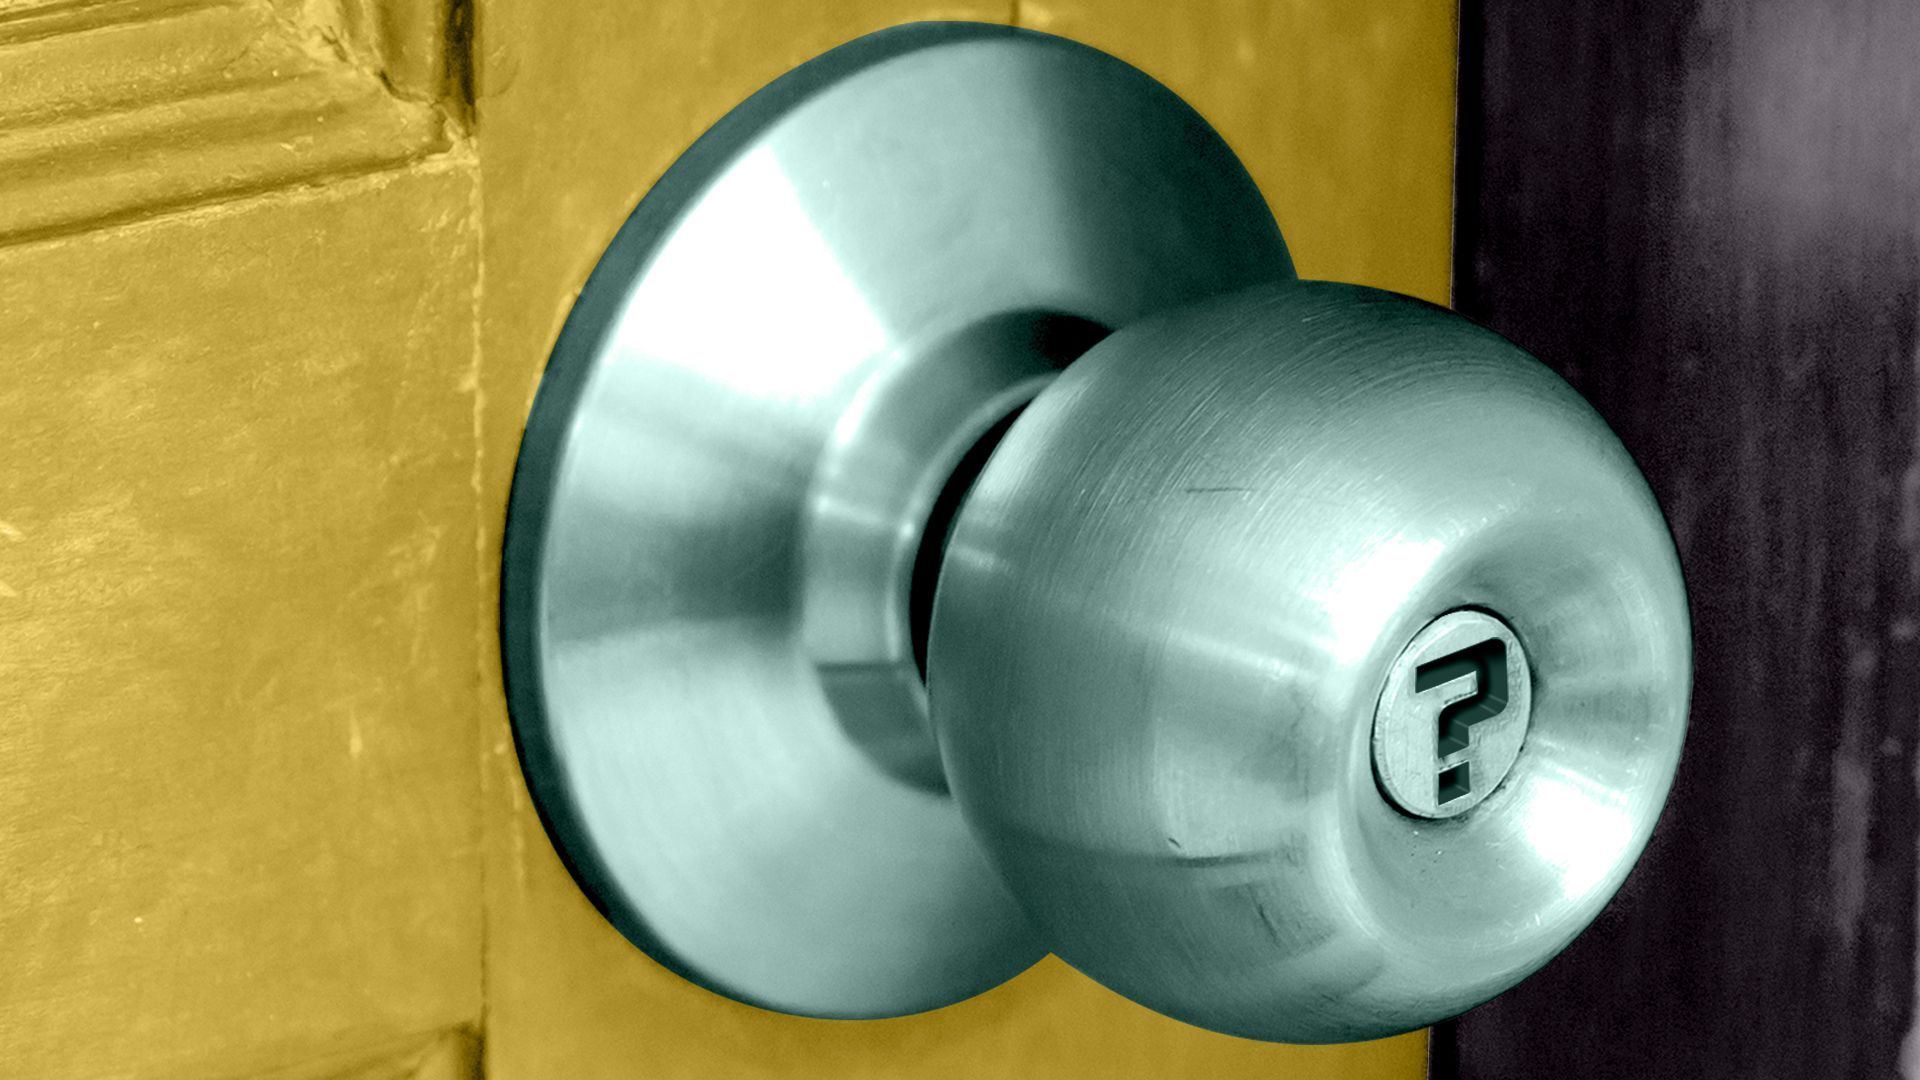 Illustration of a doorknob with a question mark-shaped keyhole.